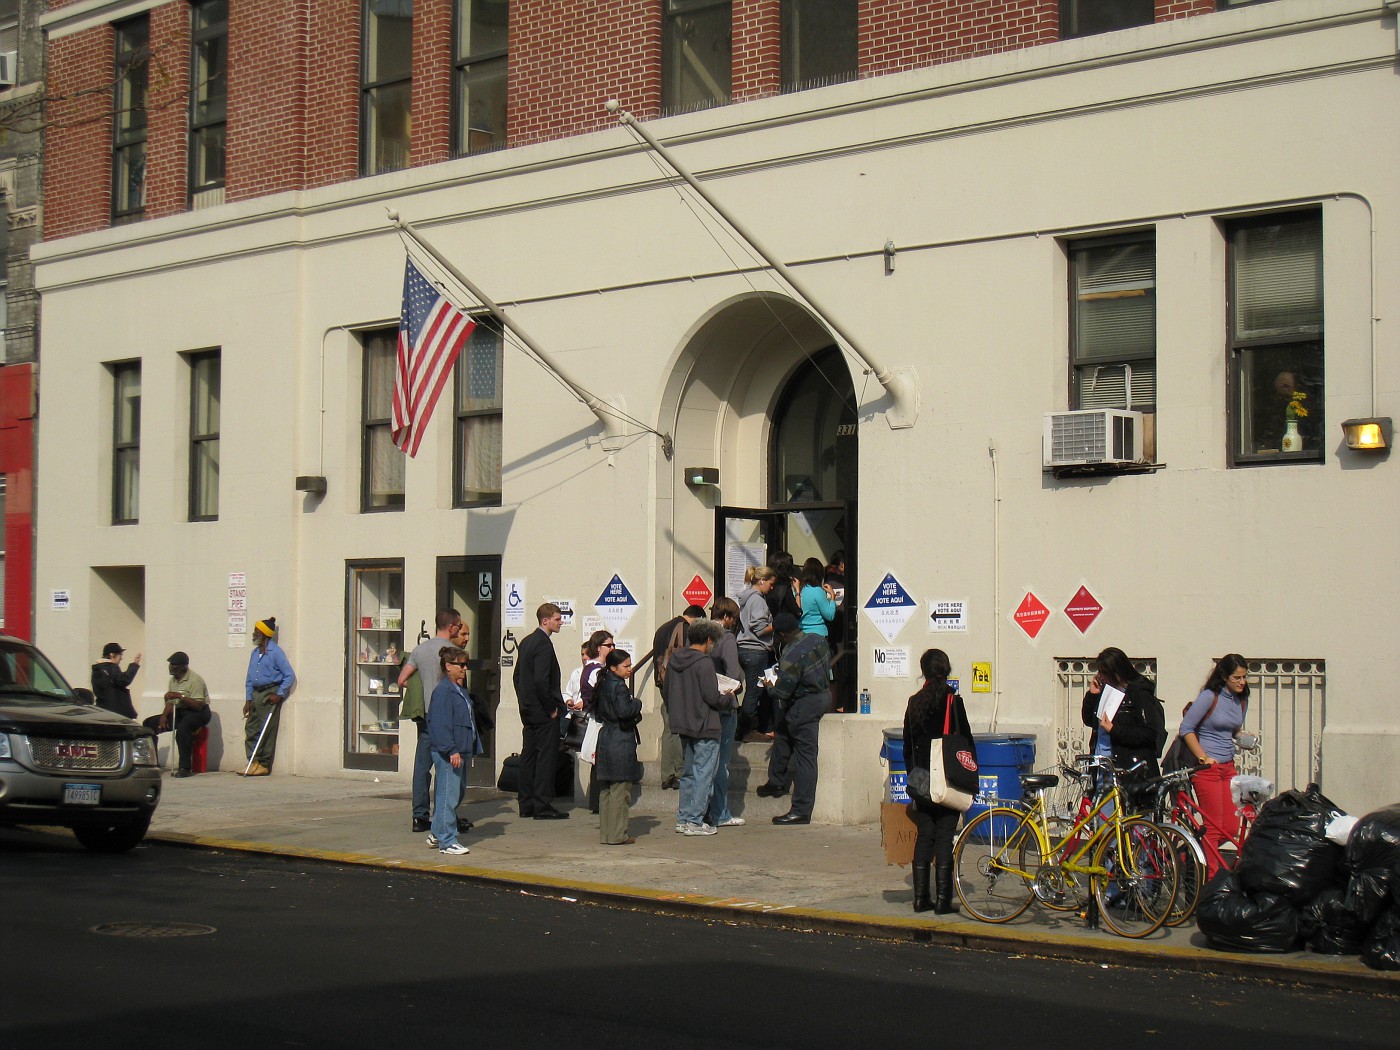 Sirovich polling site in the East Village